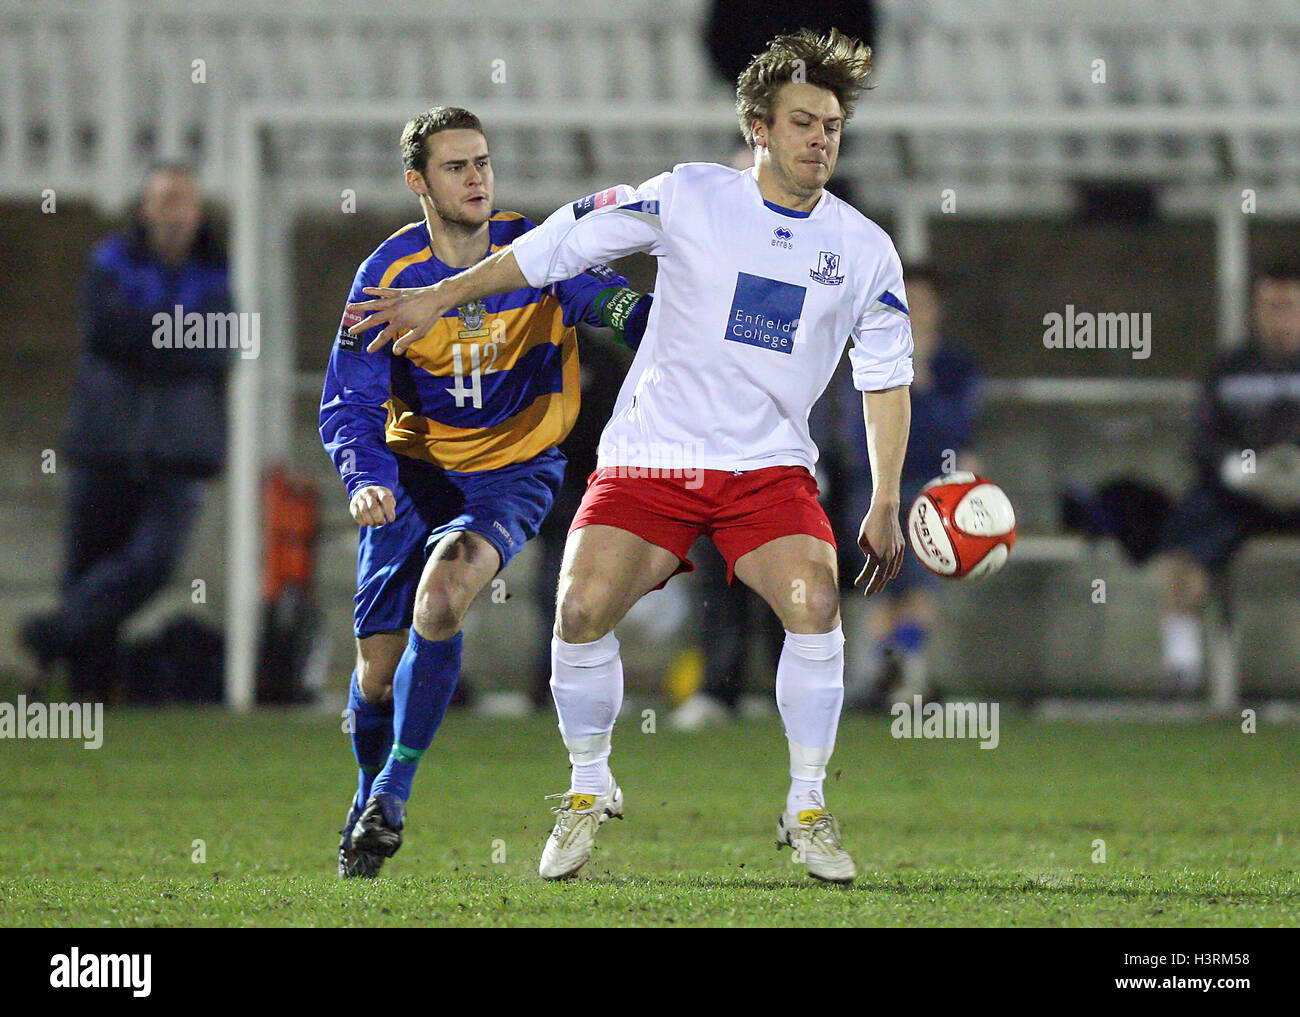 Andy Jones of Enfield Town shields the ball from Paul Clayton of Romford - Romford vs Enfield Town - Ryman League Division One North Football at Mill Field, Aveley FC - 23/03/10 Stock Photo